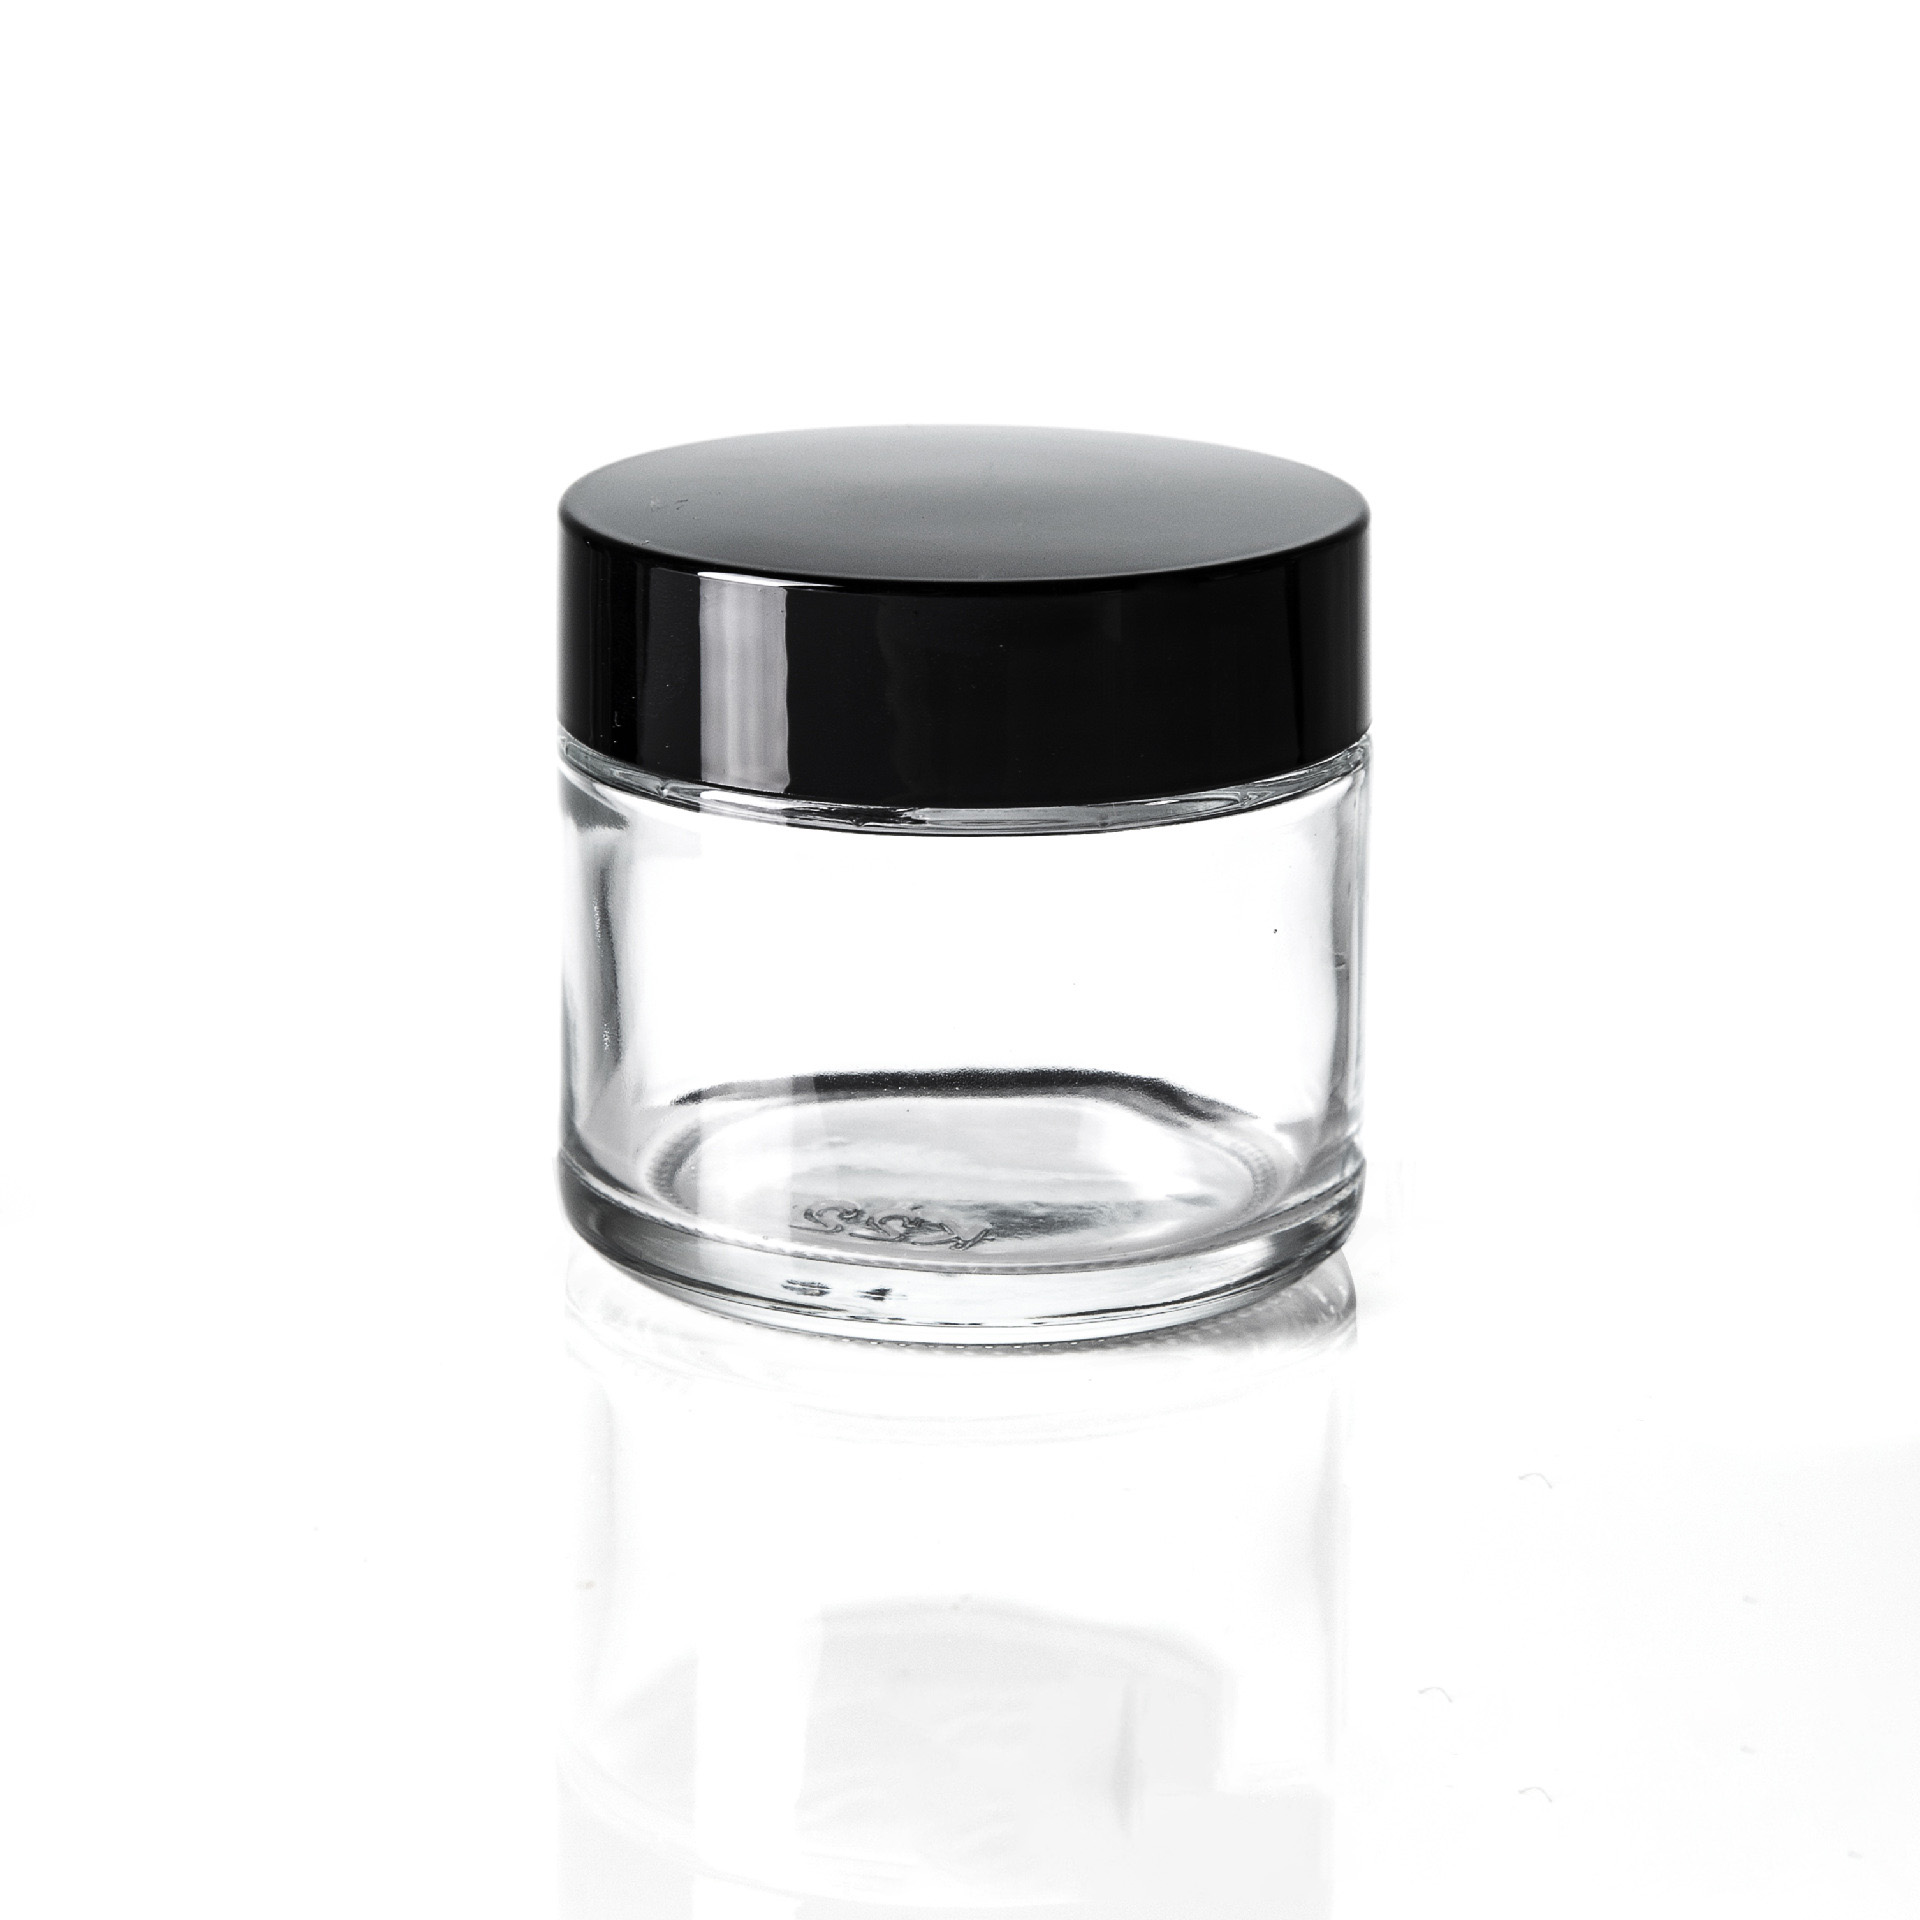 5g 10g 15g 20g 30g 50g 100g cream glass jar for glass cosmetic jar with lid